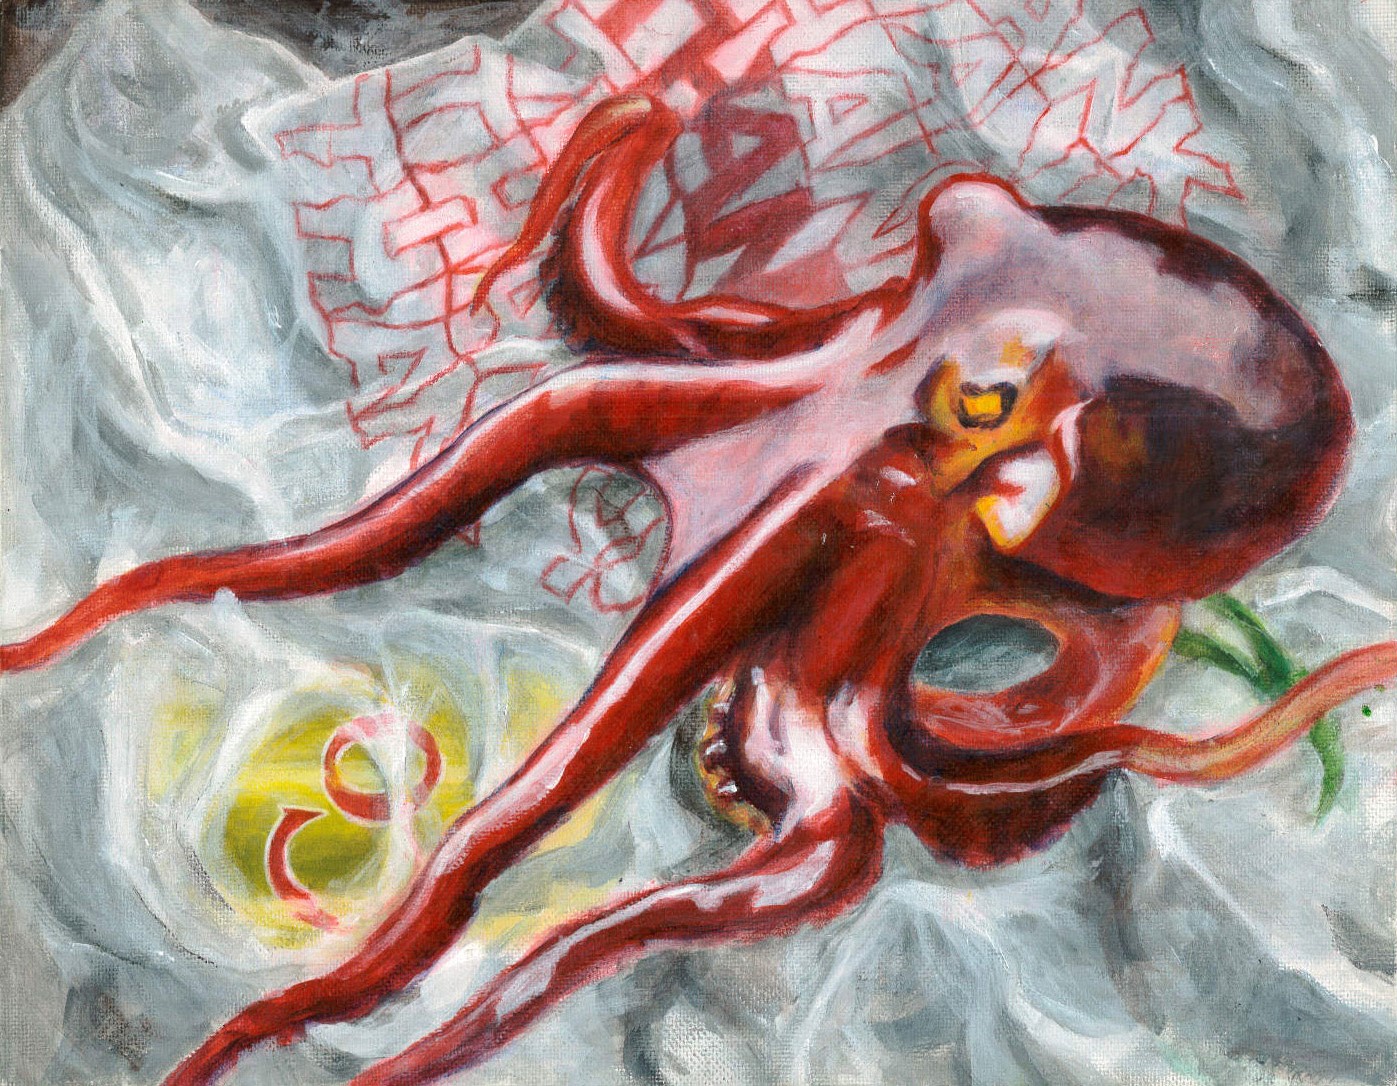 Octopus on top of a plastic shopping bag and a soda can, in acrylic and colored pencil